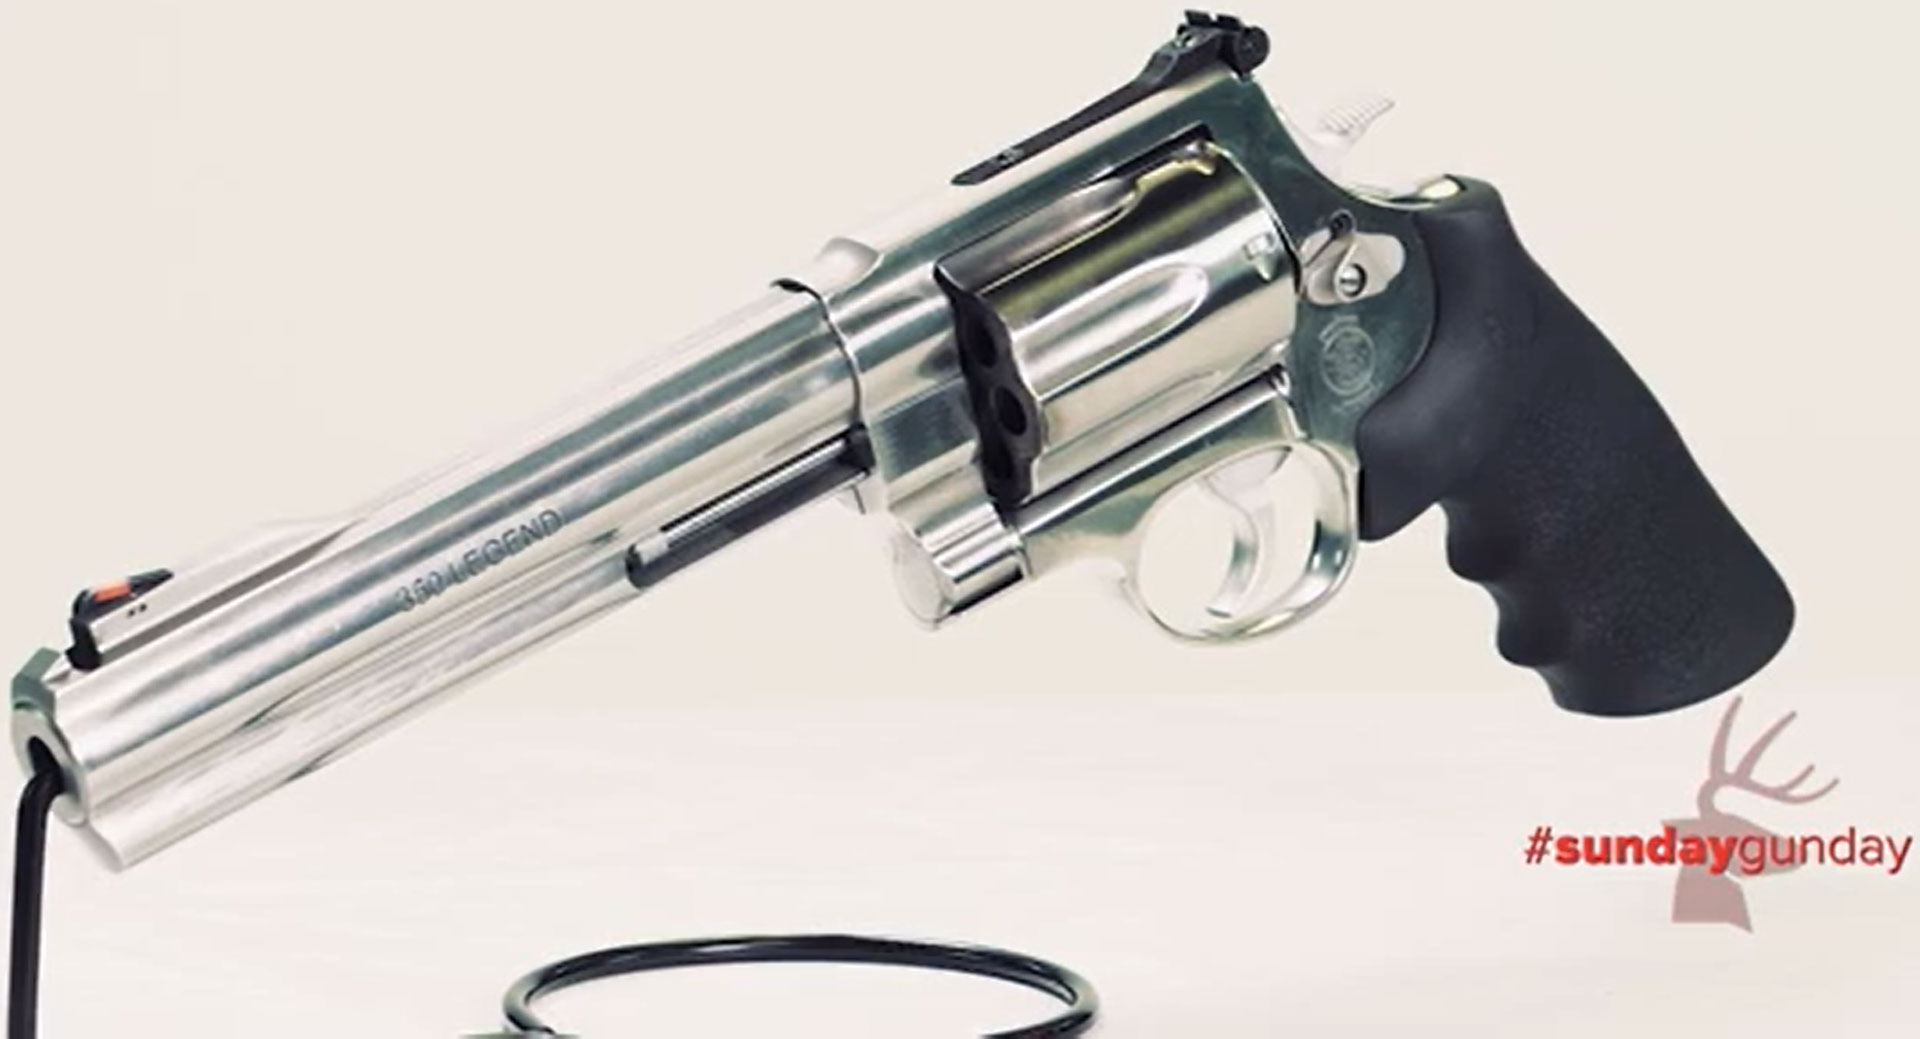 Smith & Wesson Model 350 on White